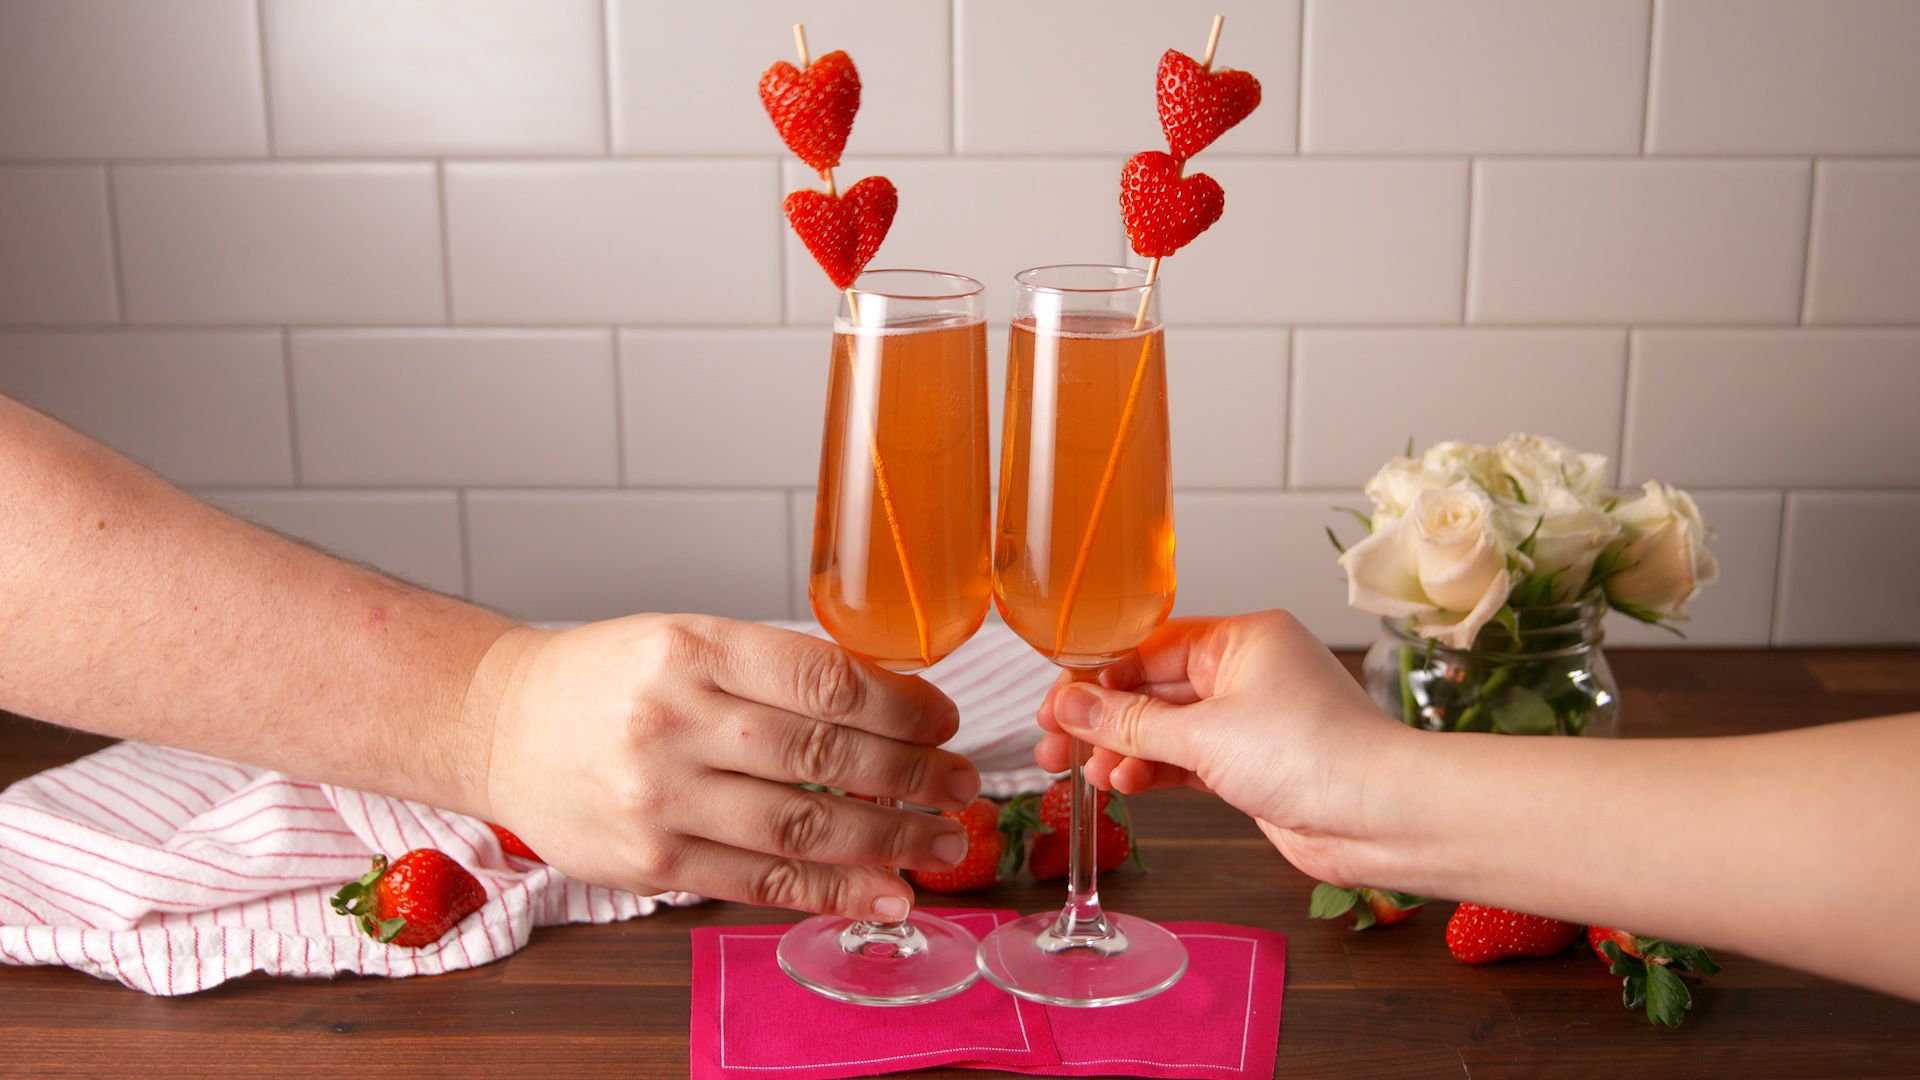 Delicious Aphrodisiac Drinks For Valentine's Day